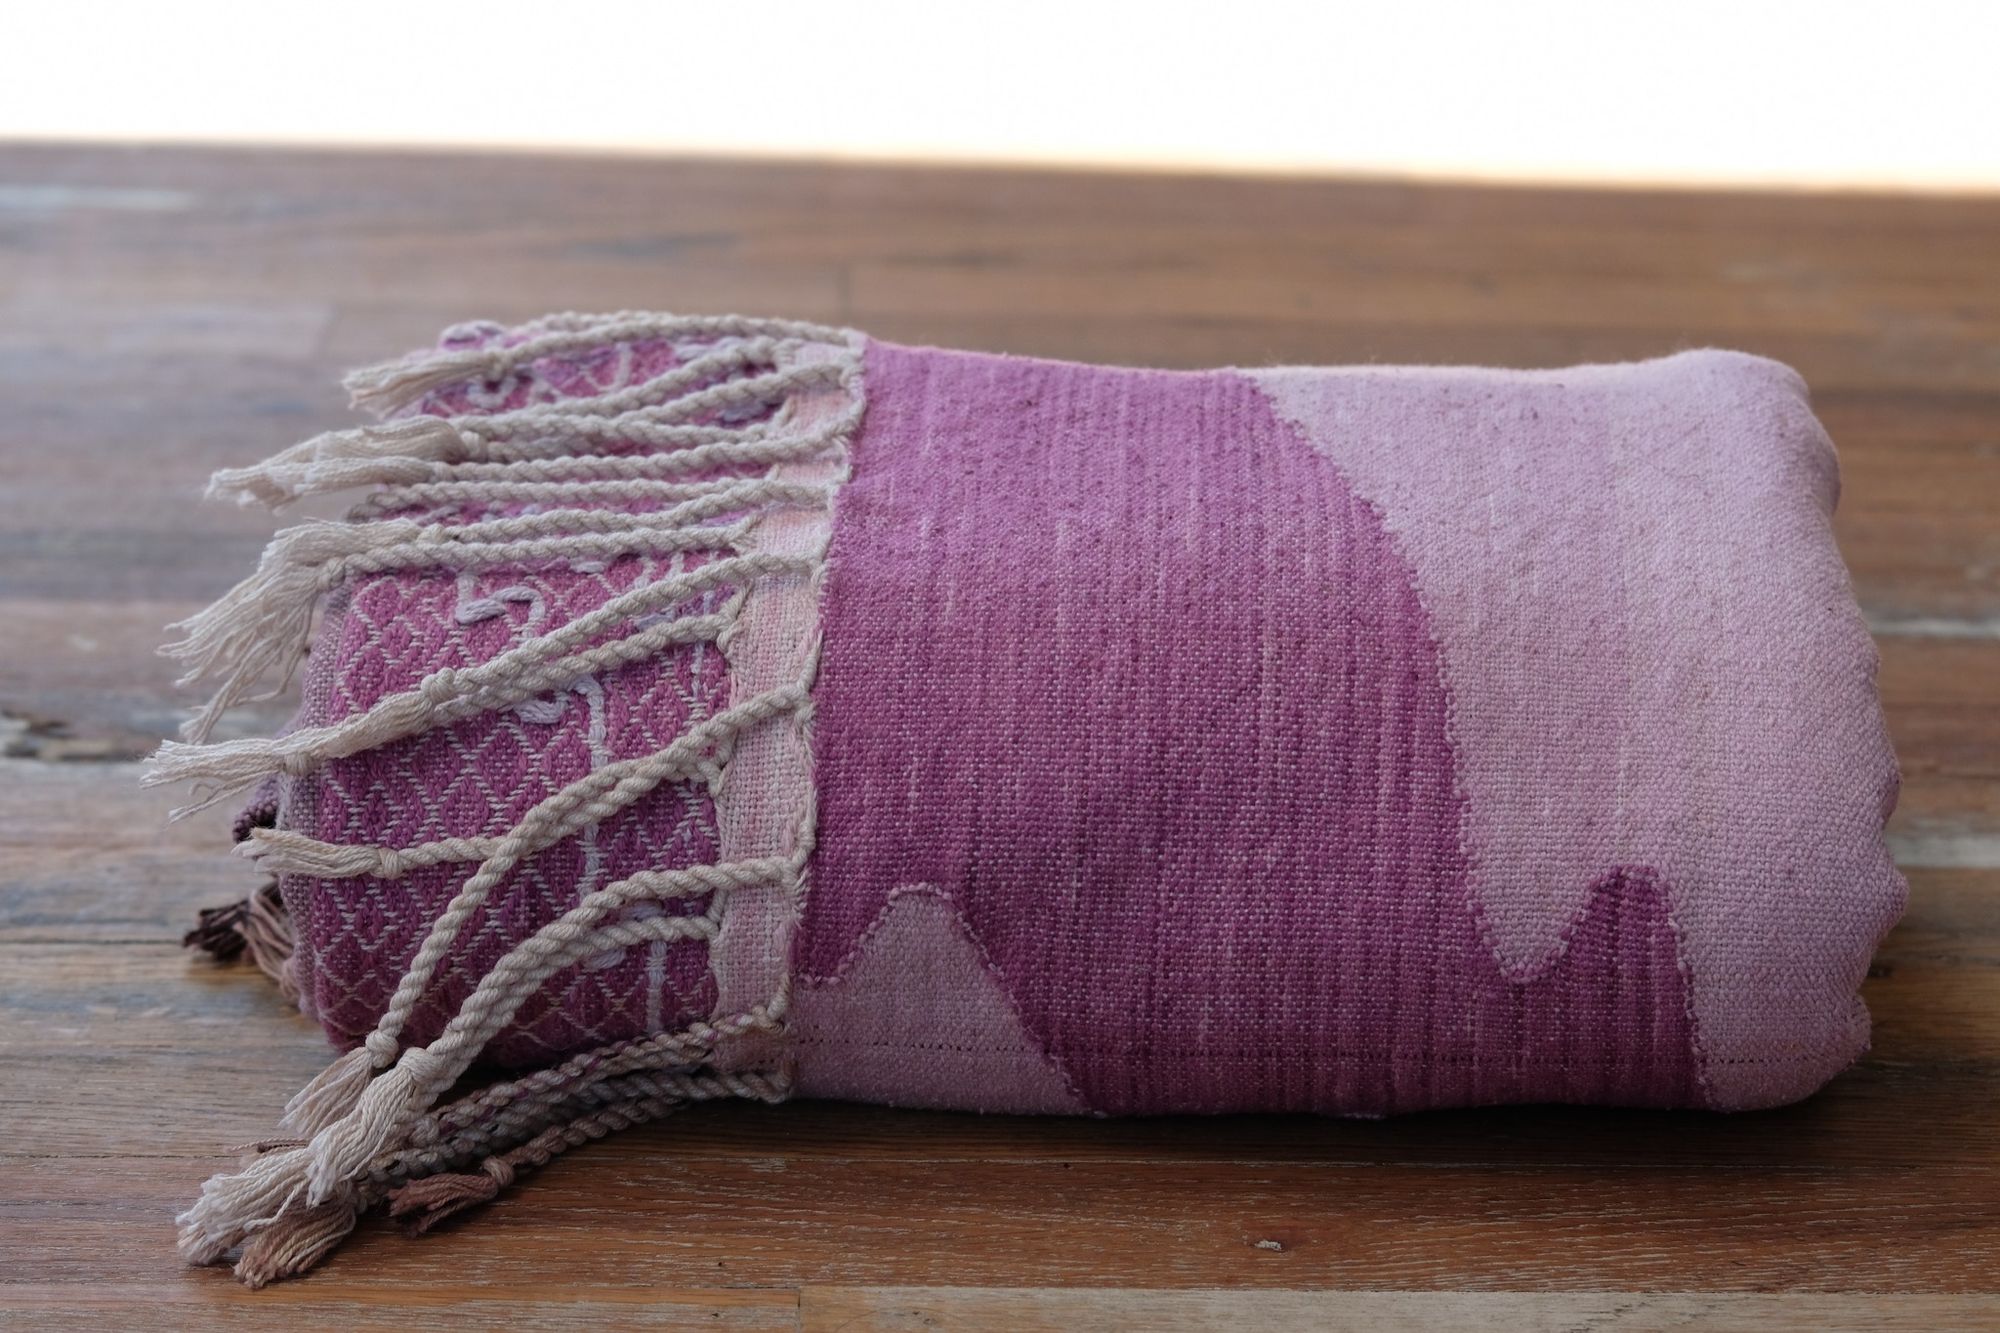 Handwoven fabric lays on a wooden floor in a gallery space. The fabric is naturally dyed with cochineal in all shades of pink and fuchsia with a design of a river and three moons on it